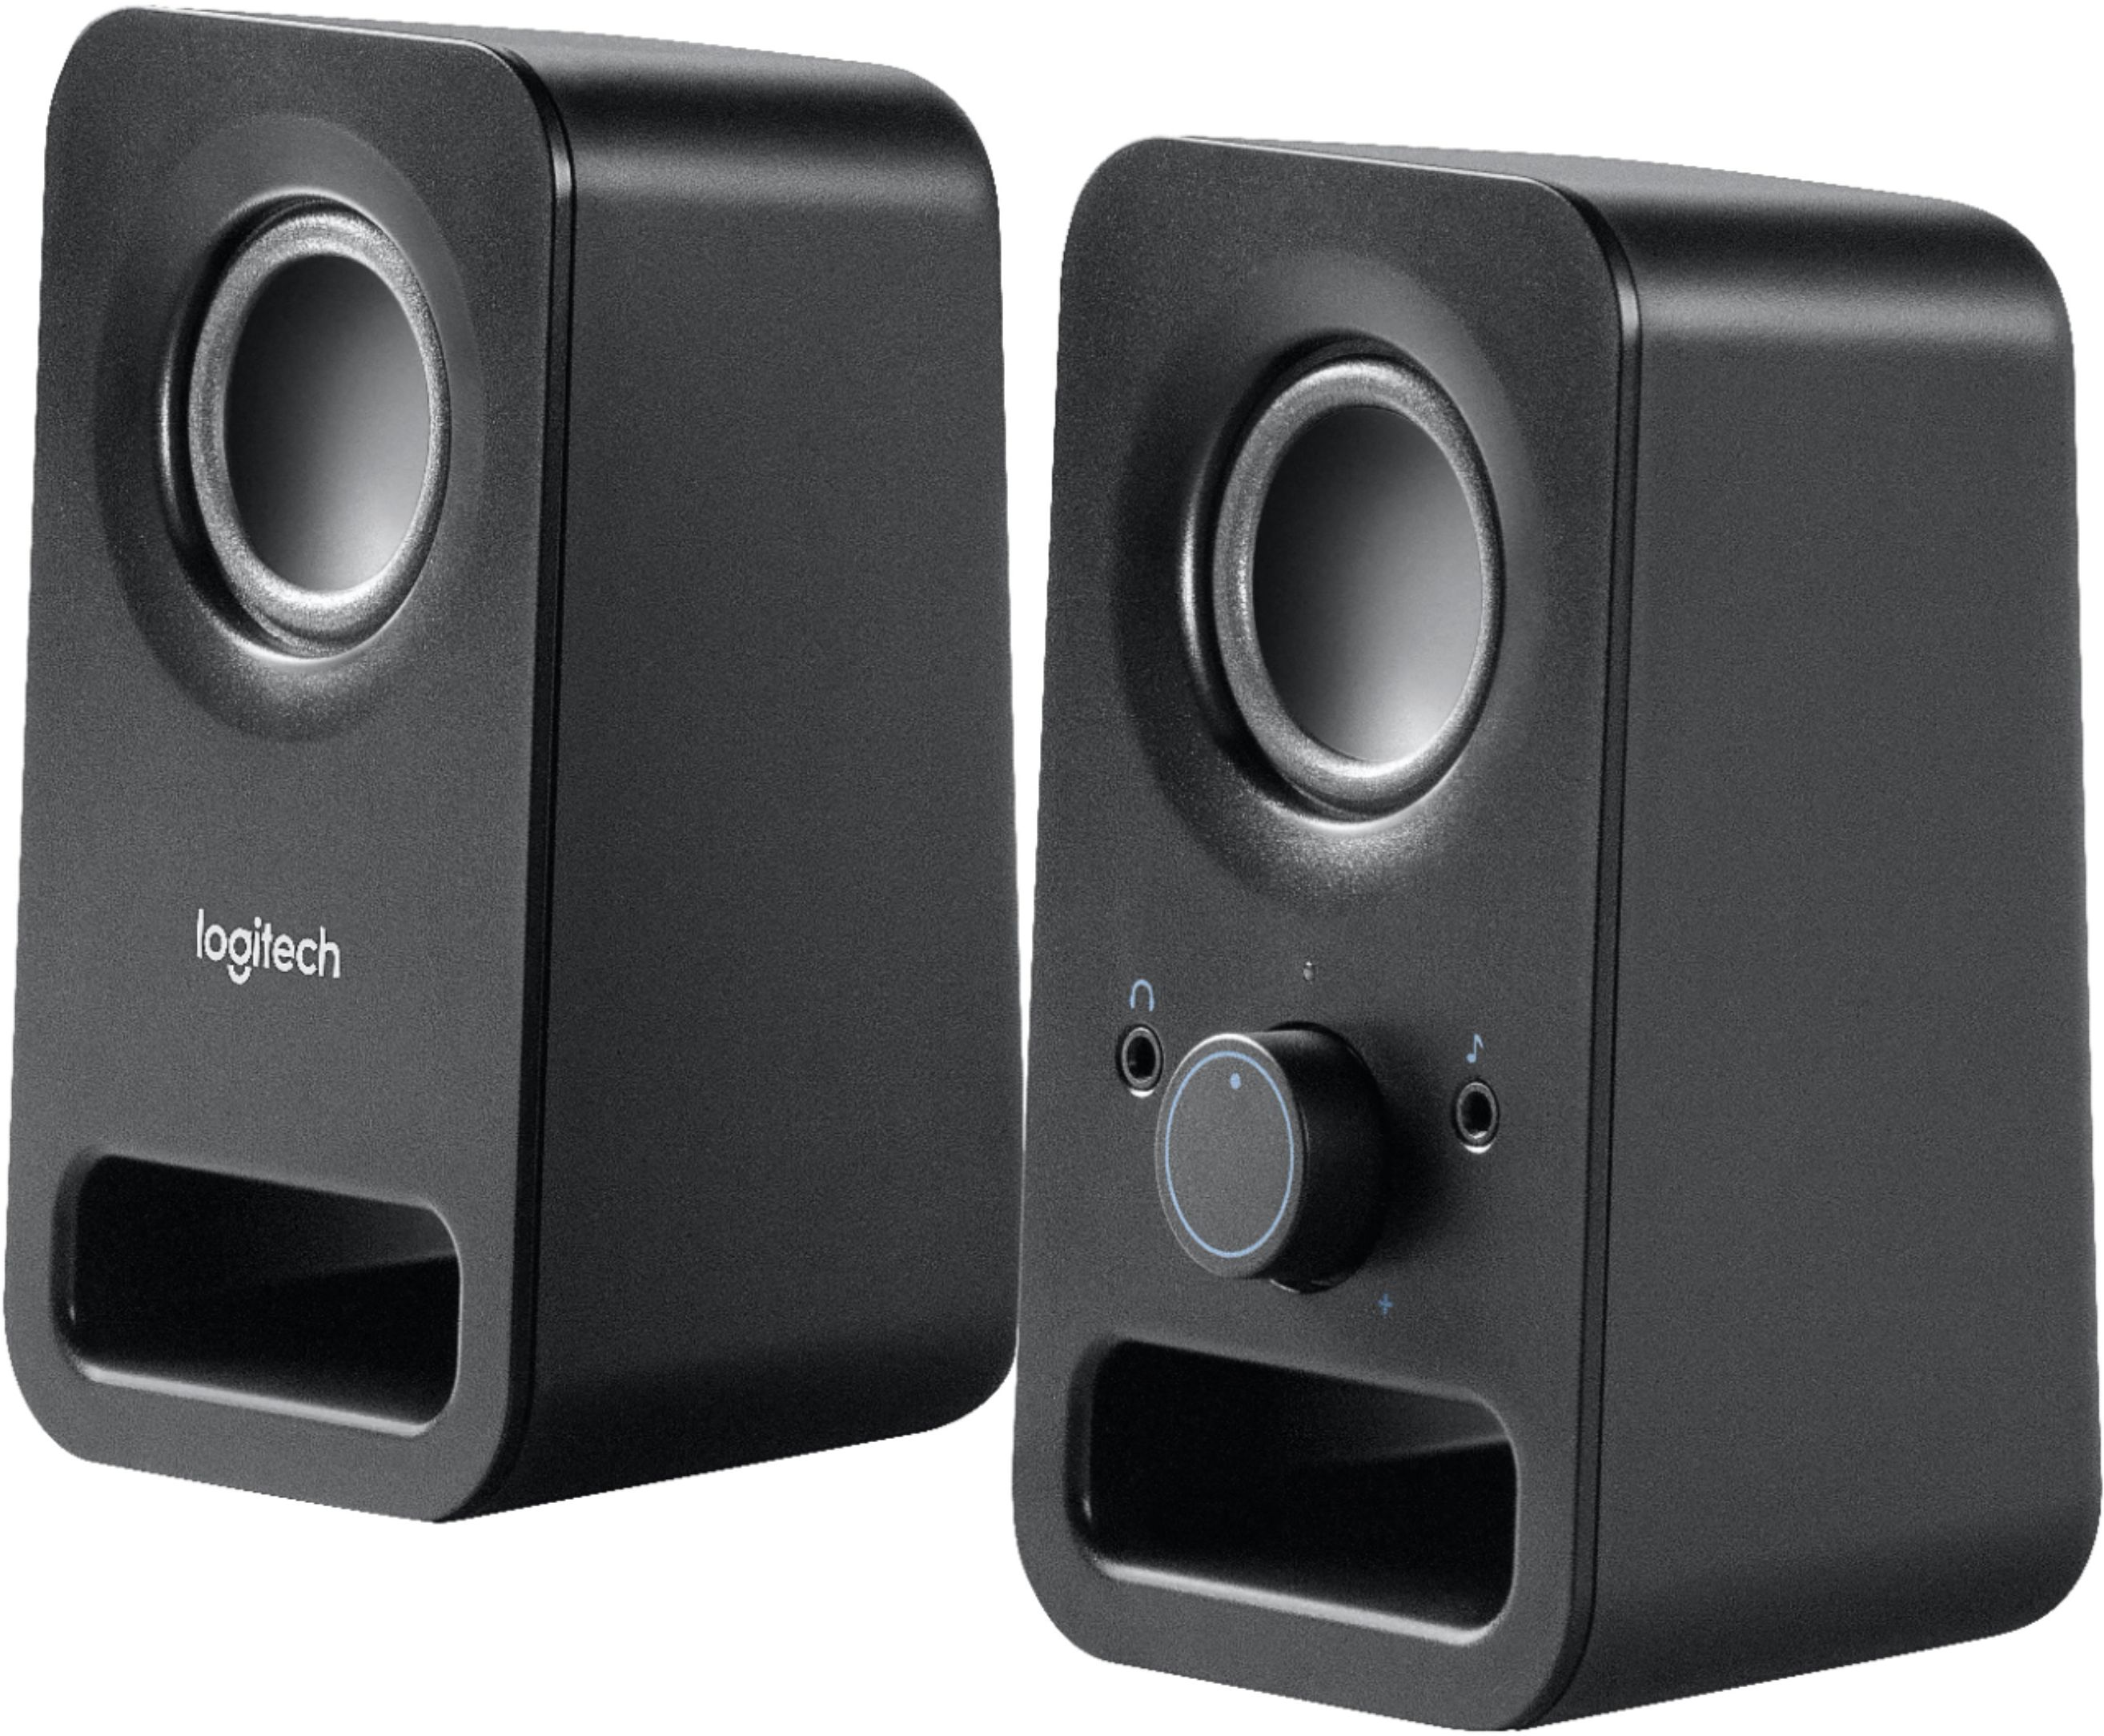 Logitech 4 Pc Speakers With Subwoofer